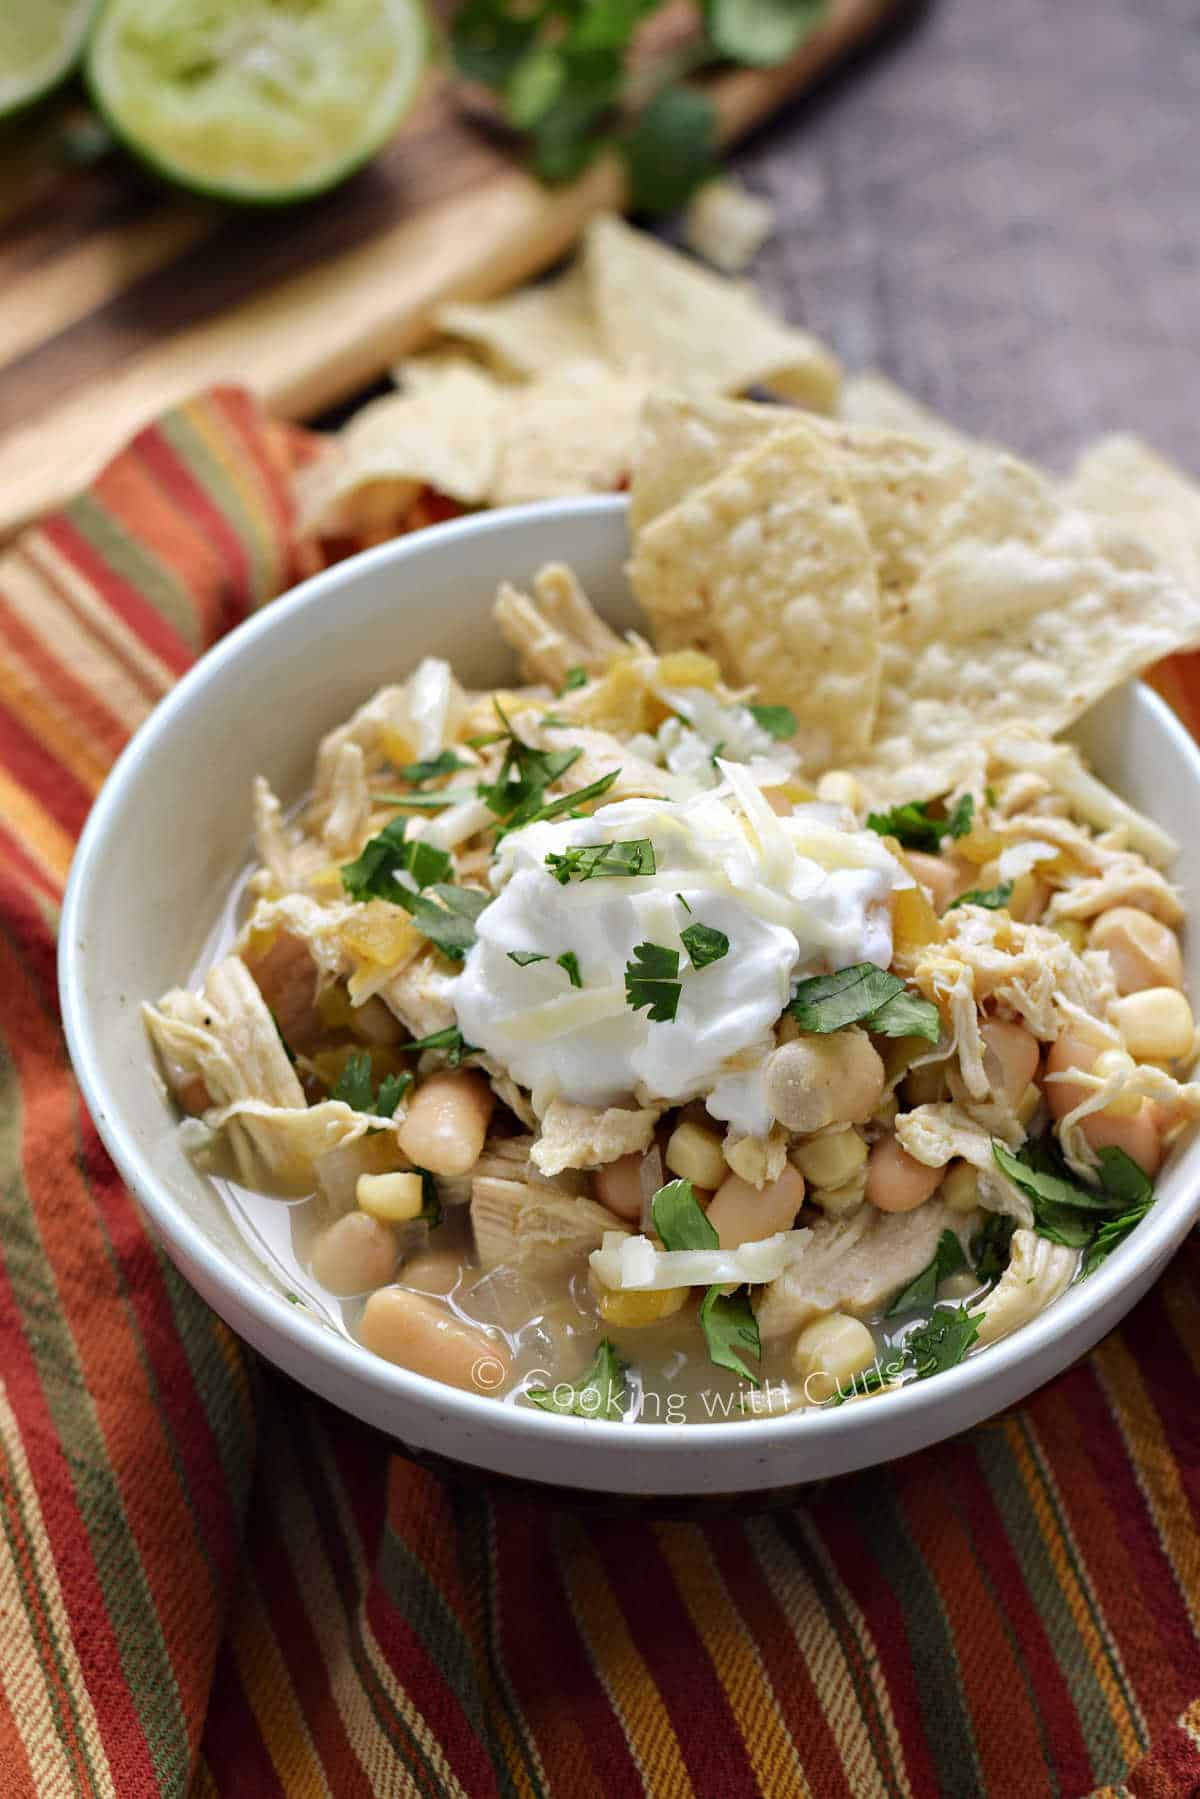 A bowl of white chicken chili topped with sour cream, cilantro, and tortilla chips with limes in the background.